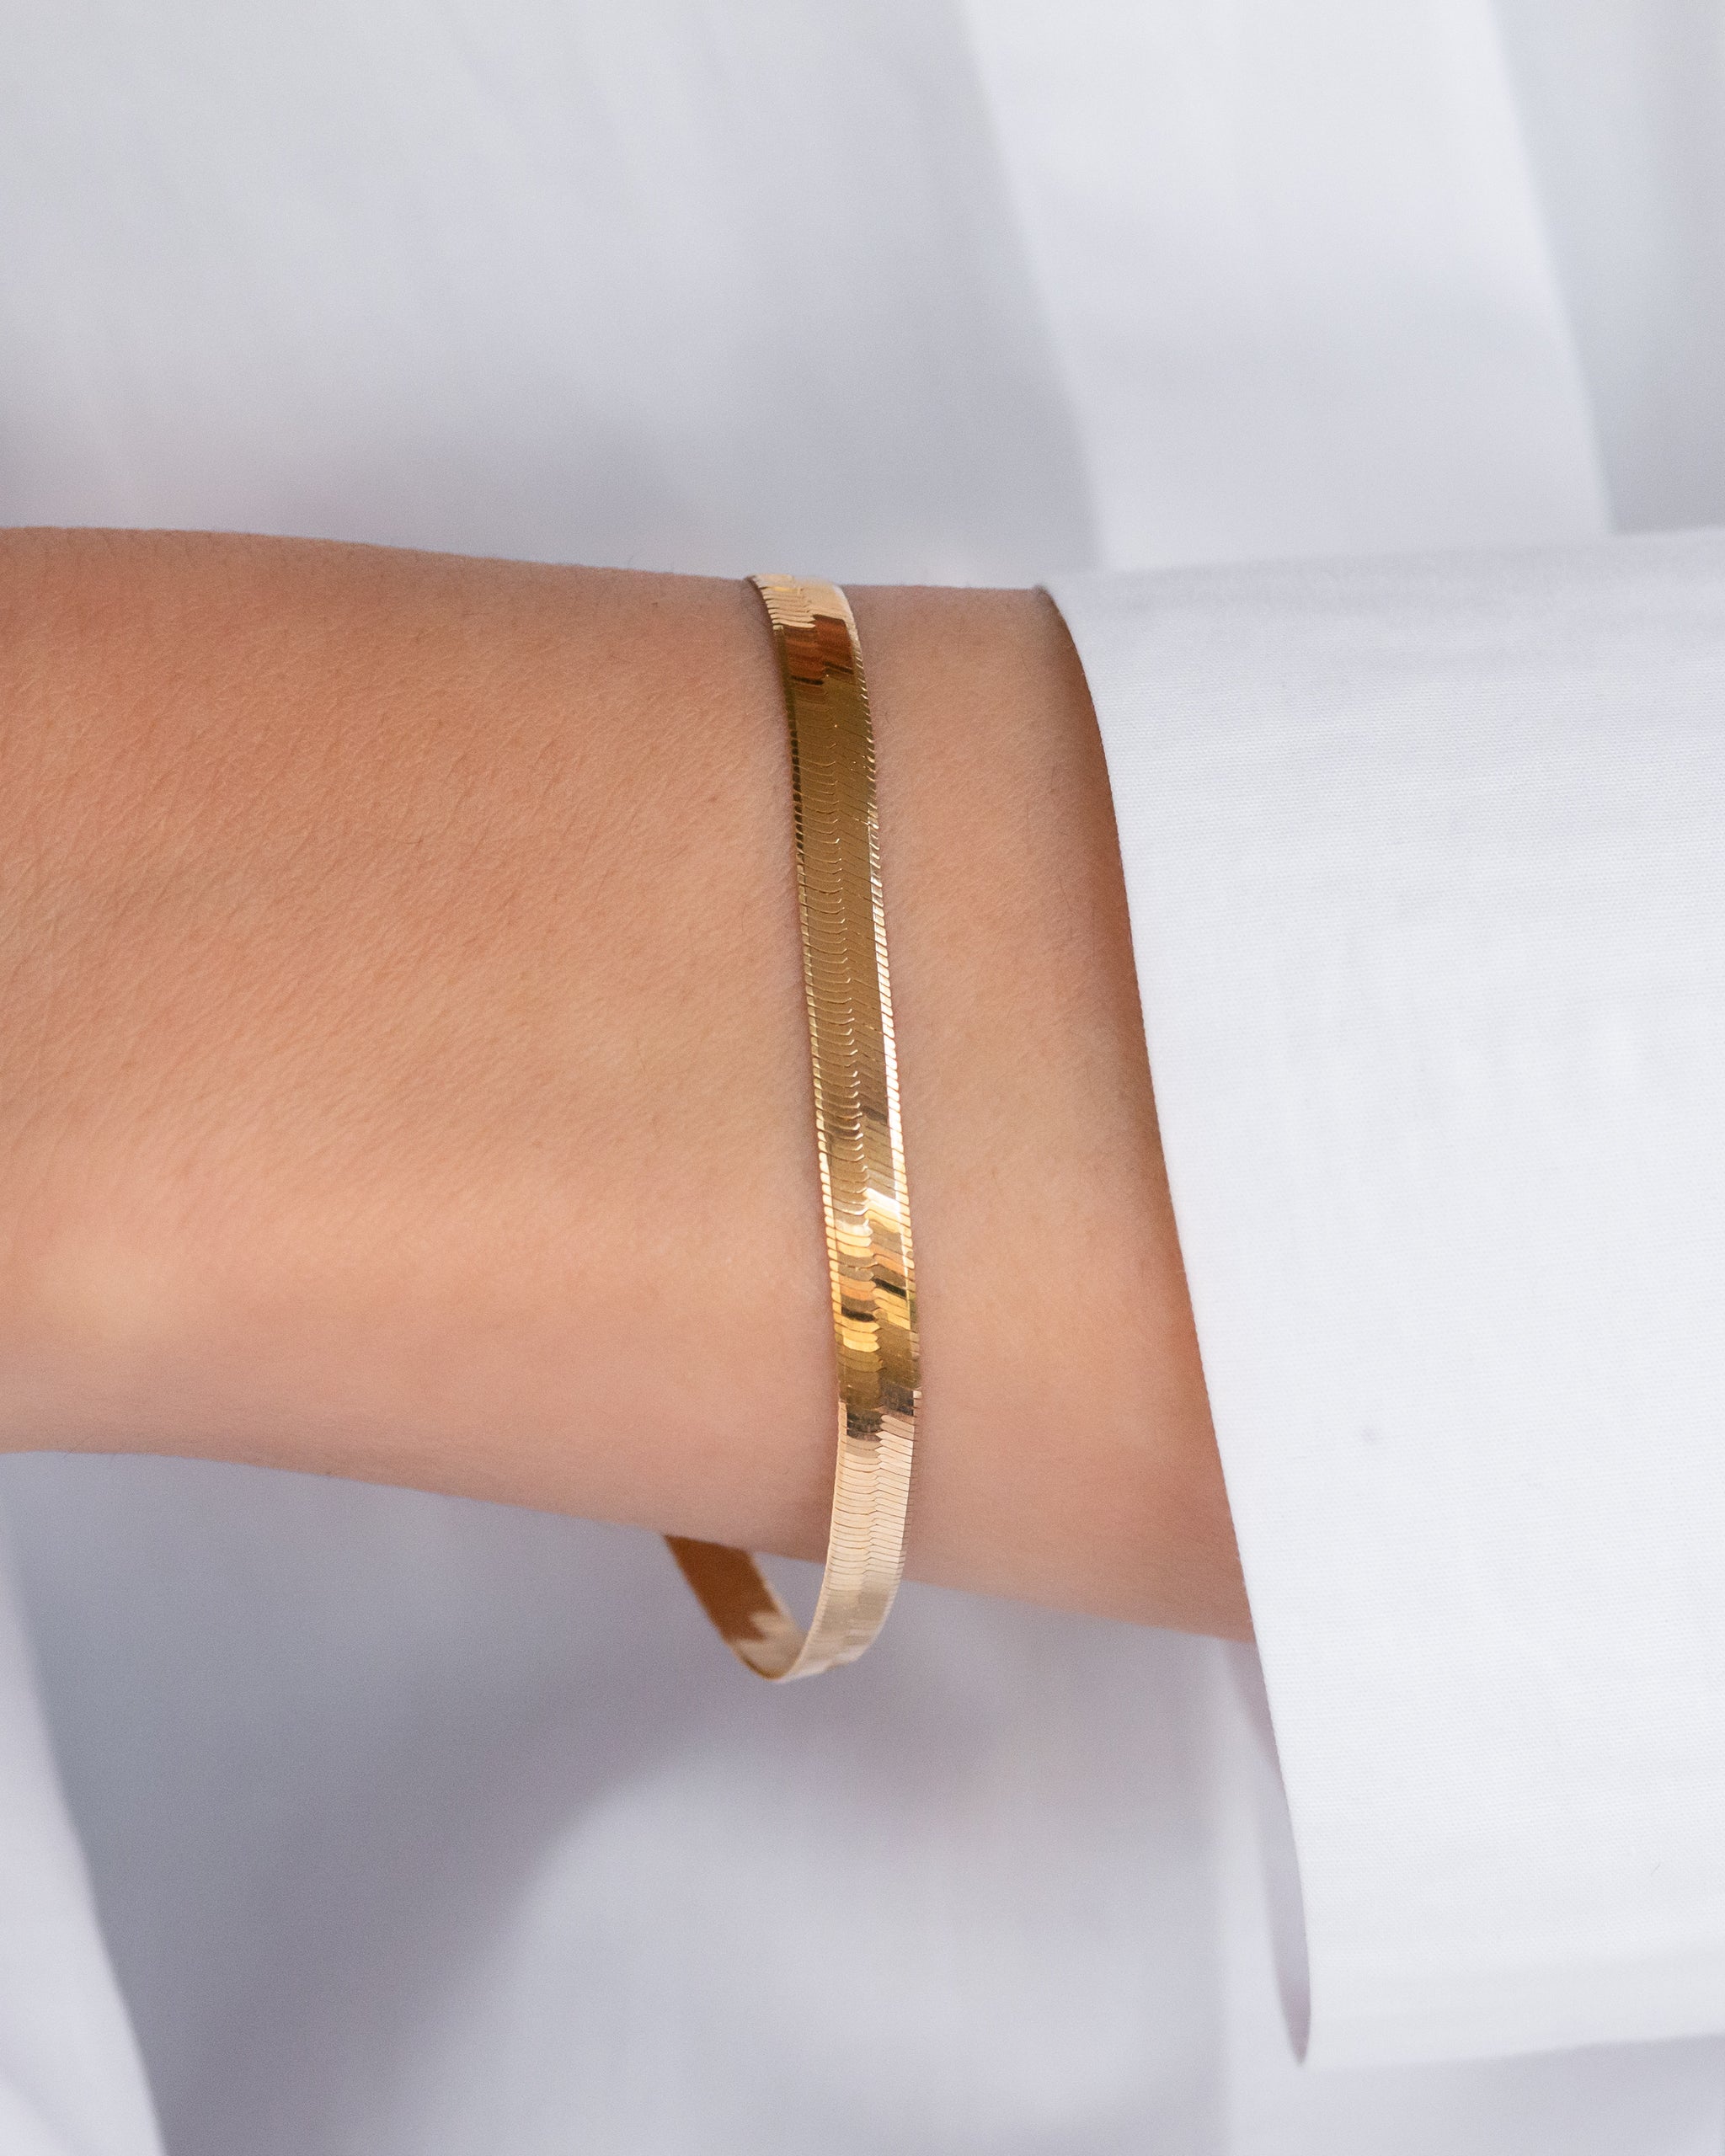 14k Gold Filled Bracelet with large Love Charm (5mm) | Arm Candy by Alysa